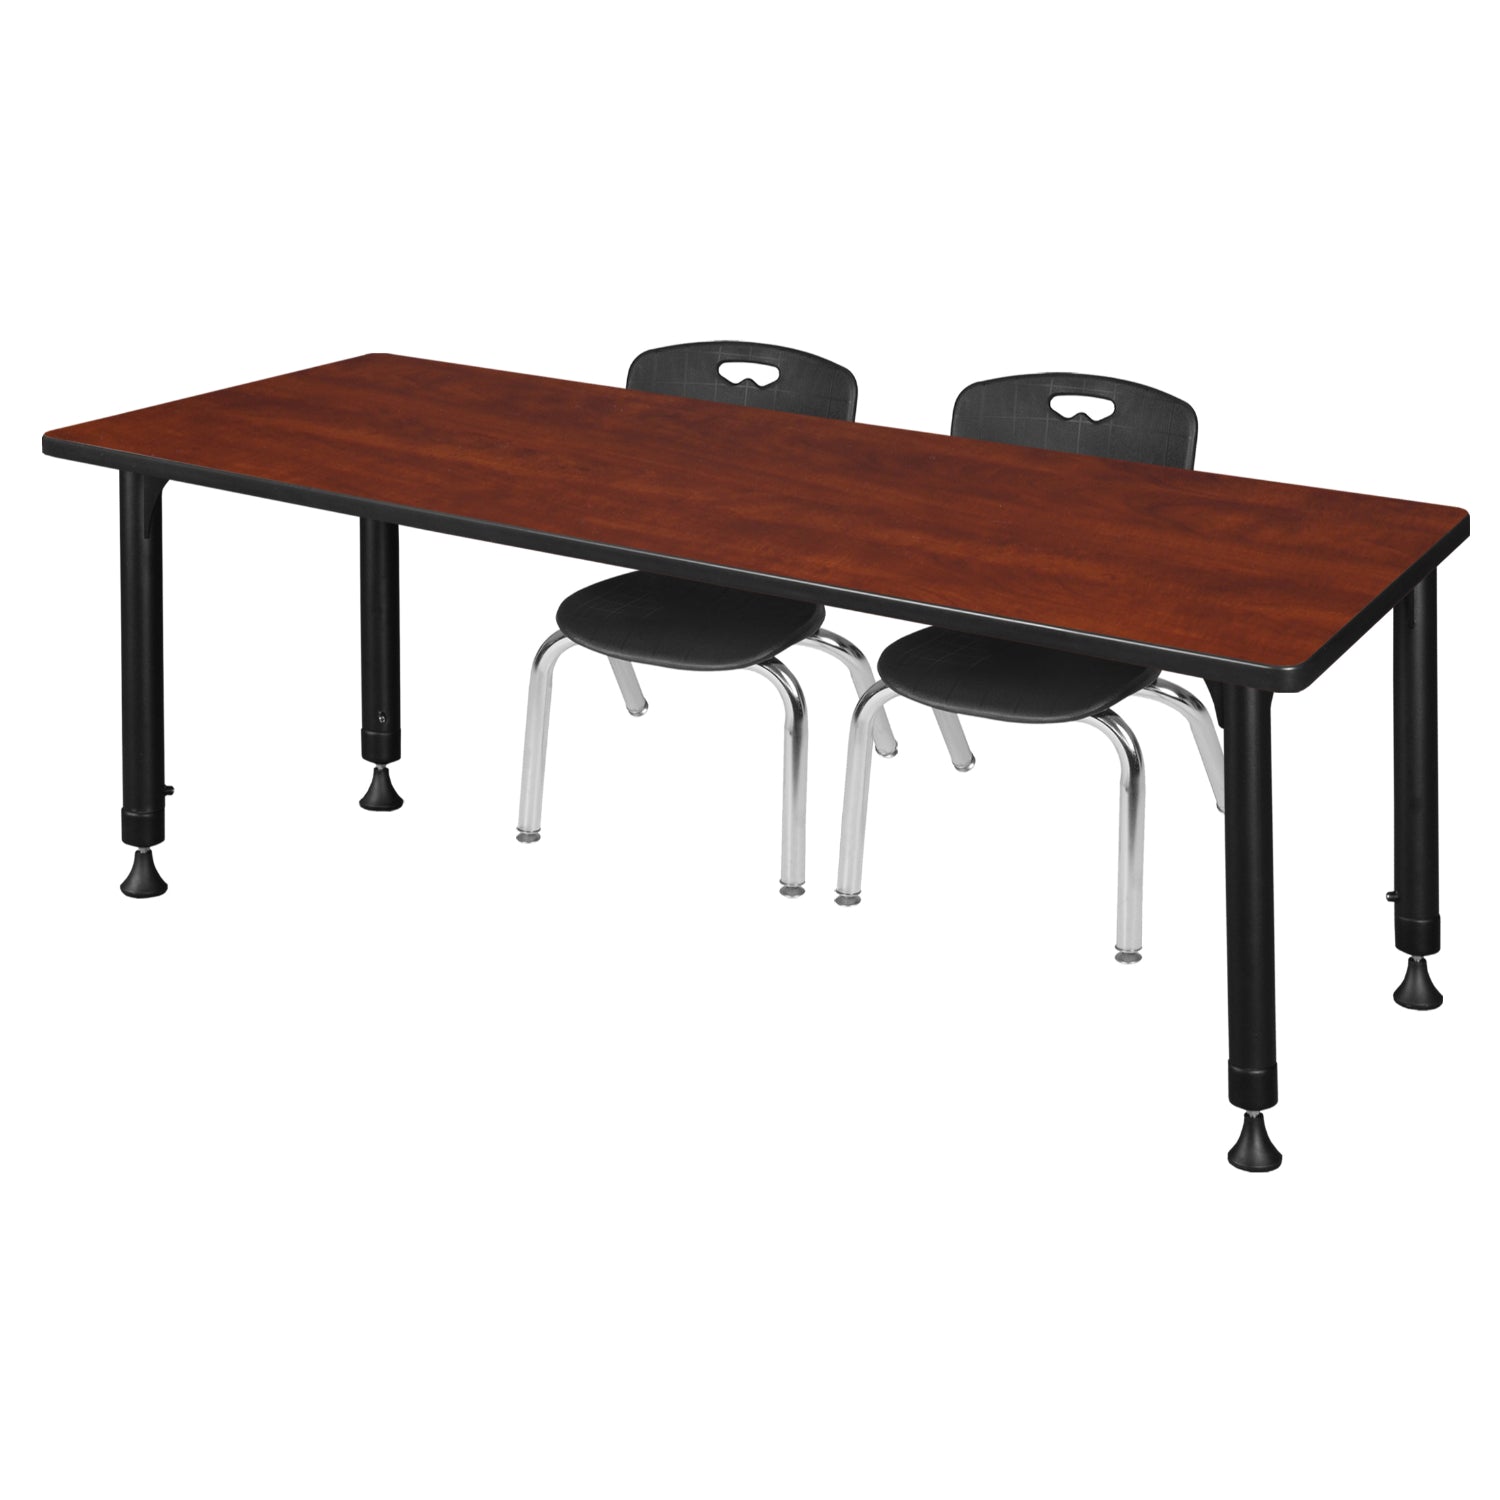 Kee Classroom Table and Chair Package, Kee 72" x 24" Rectangular Adjustable Height Table with 2 Andy 12" Stack Chairs